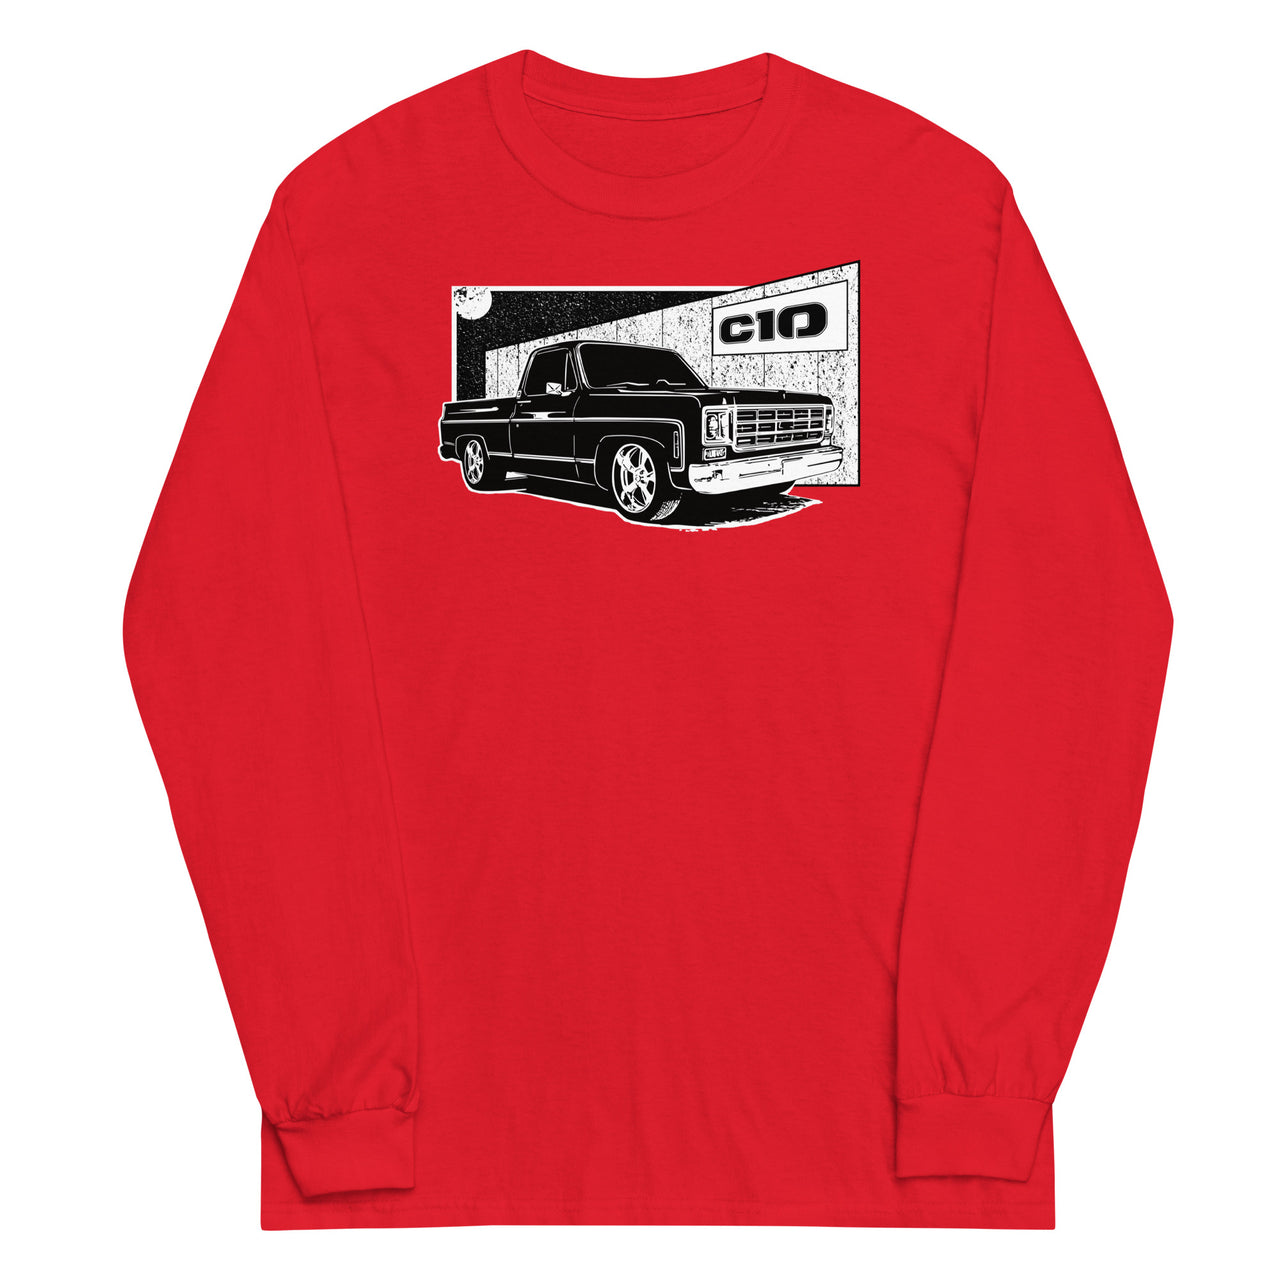 77 Square Body C10 Long Sleeve T-Shirt in red